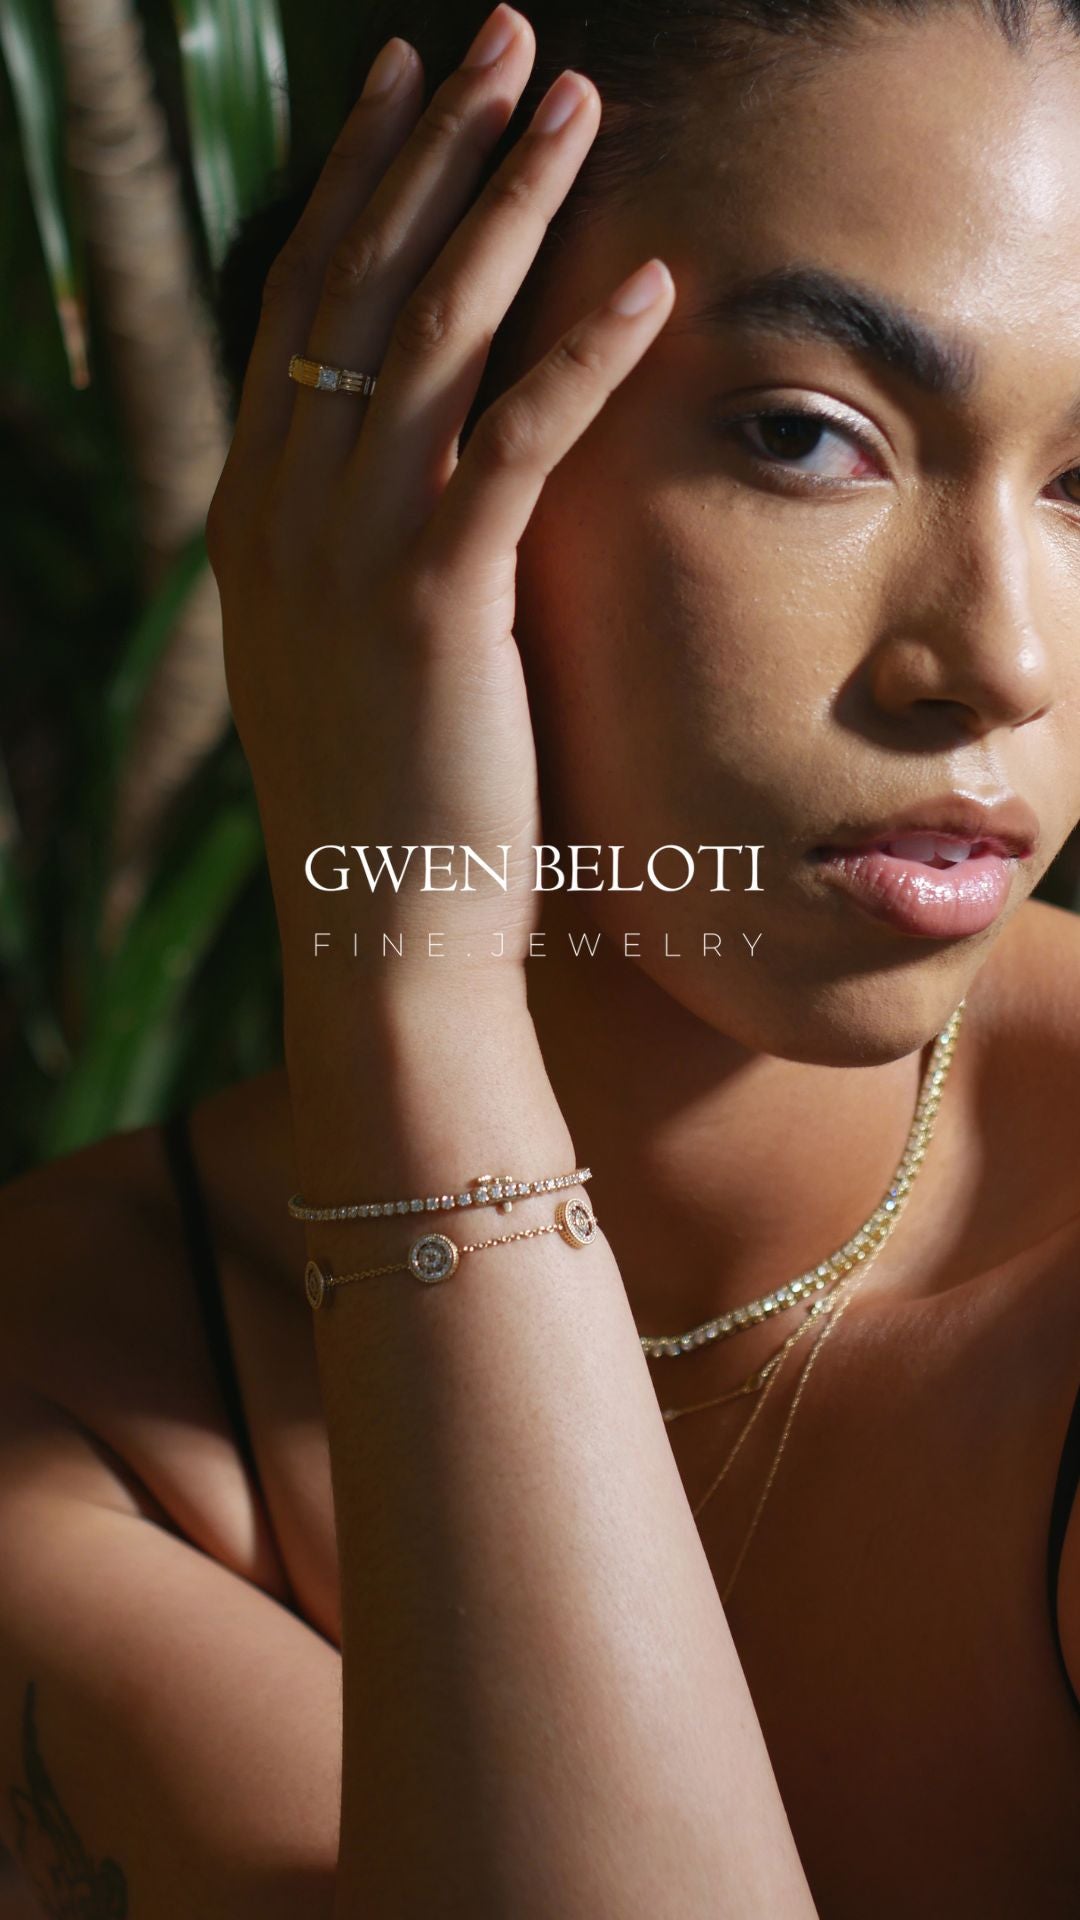 Gwen Beloti Jewelry Collection (Your Story) (1).jpg__PID:554fa194-4832-4192-945d-0c2511414829